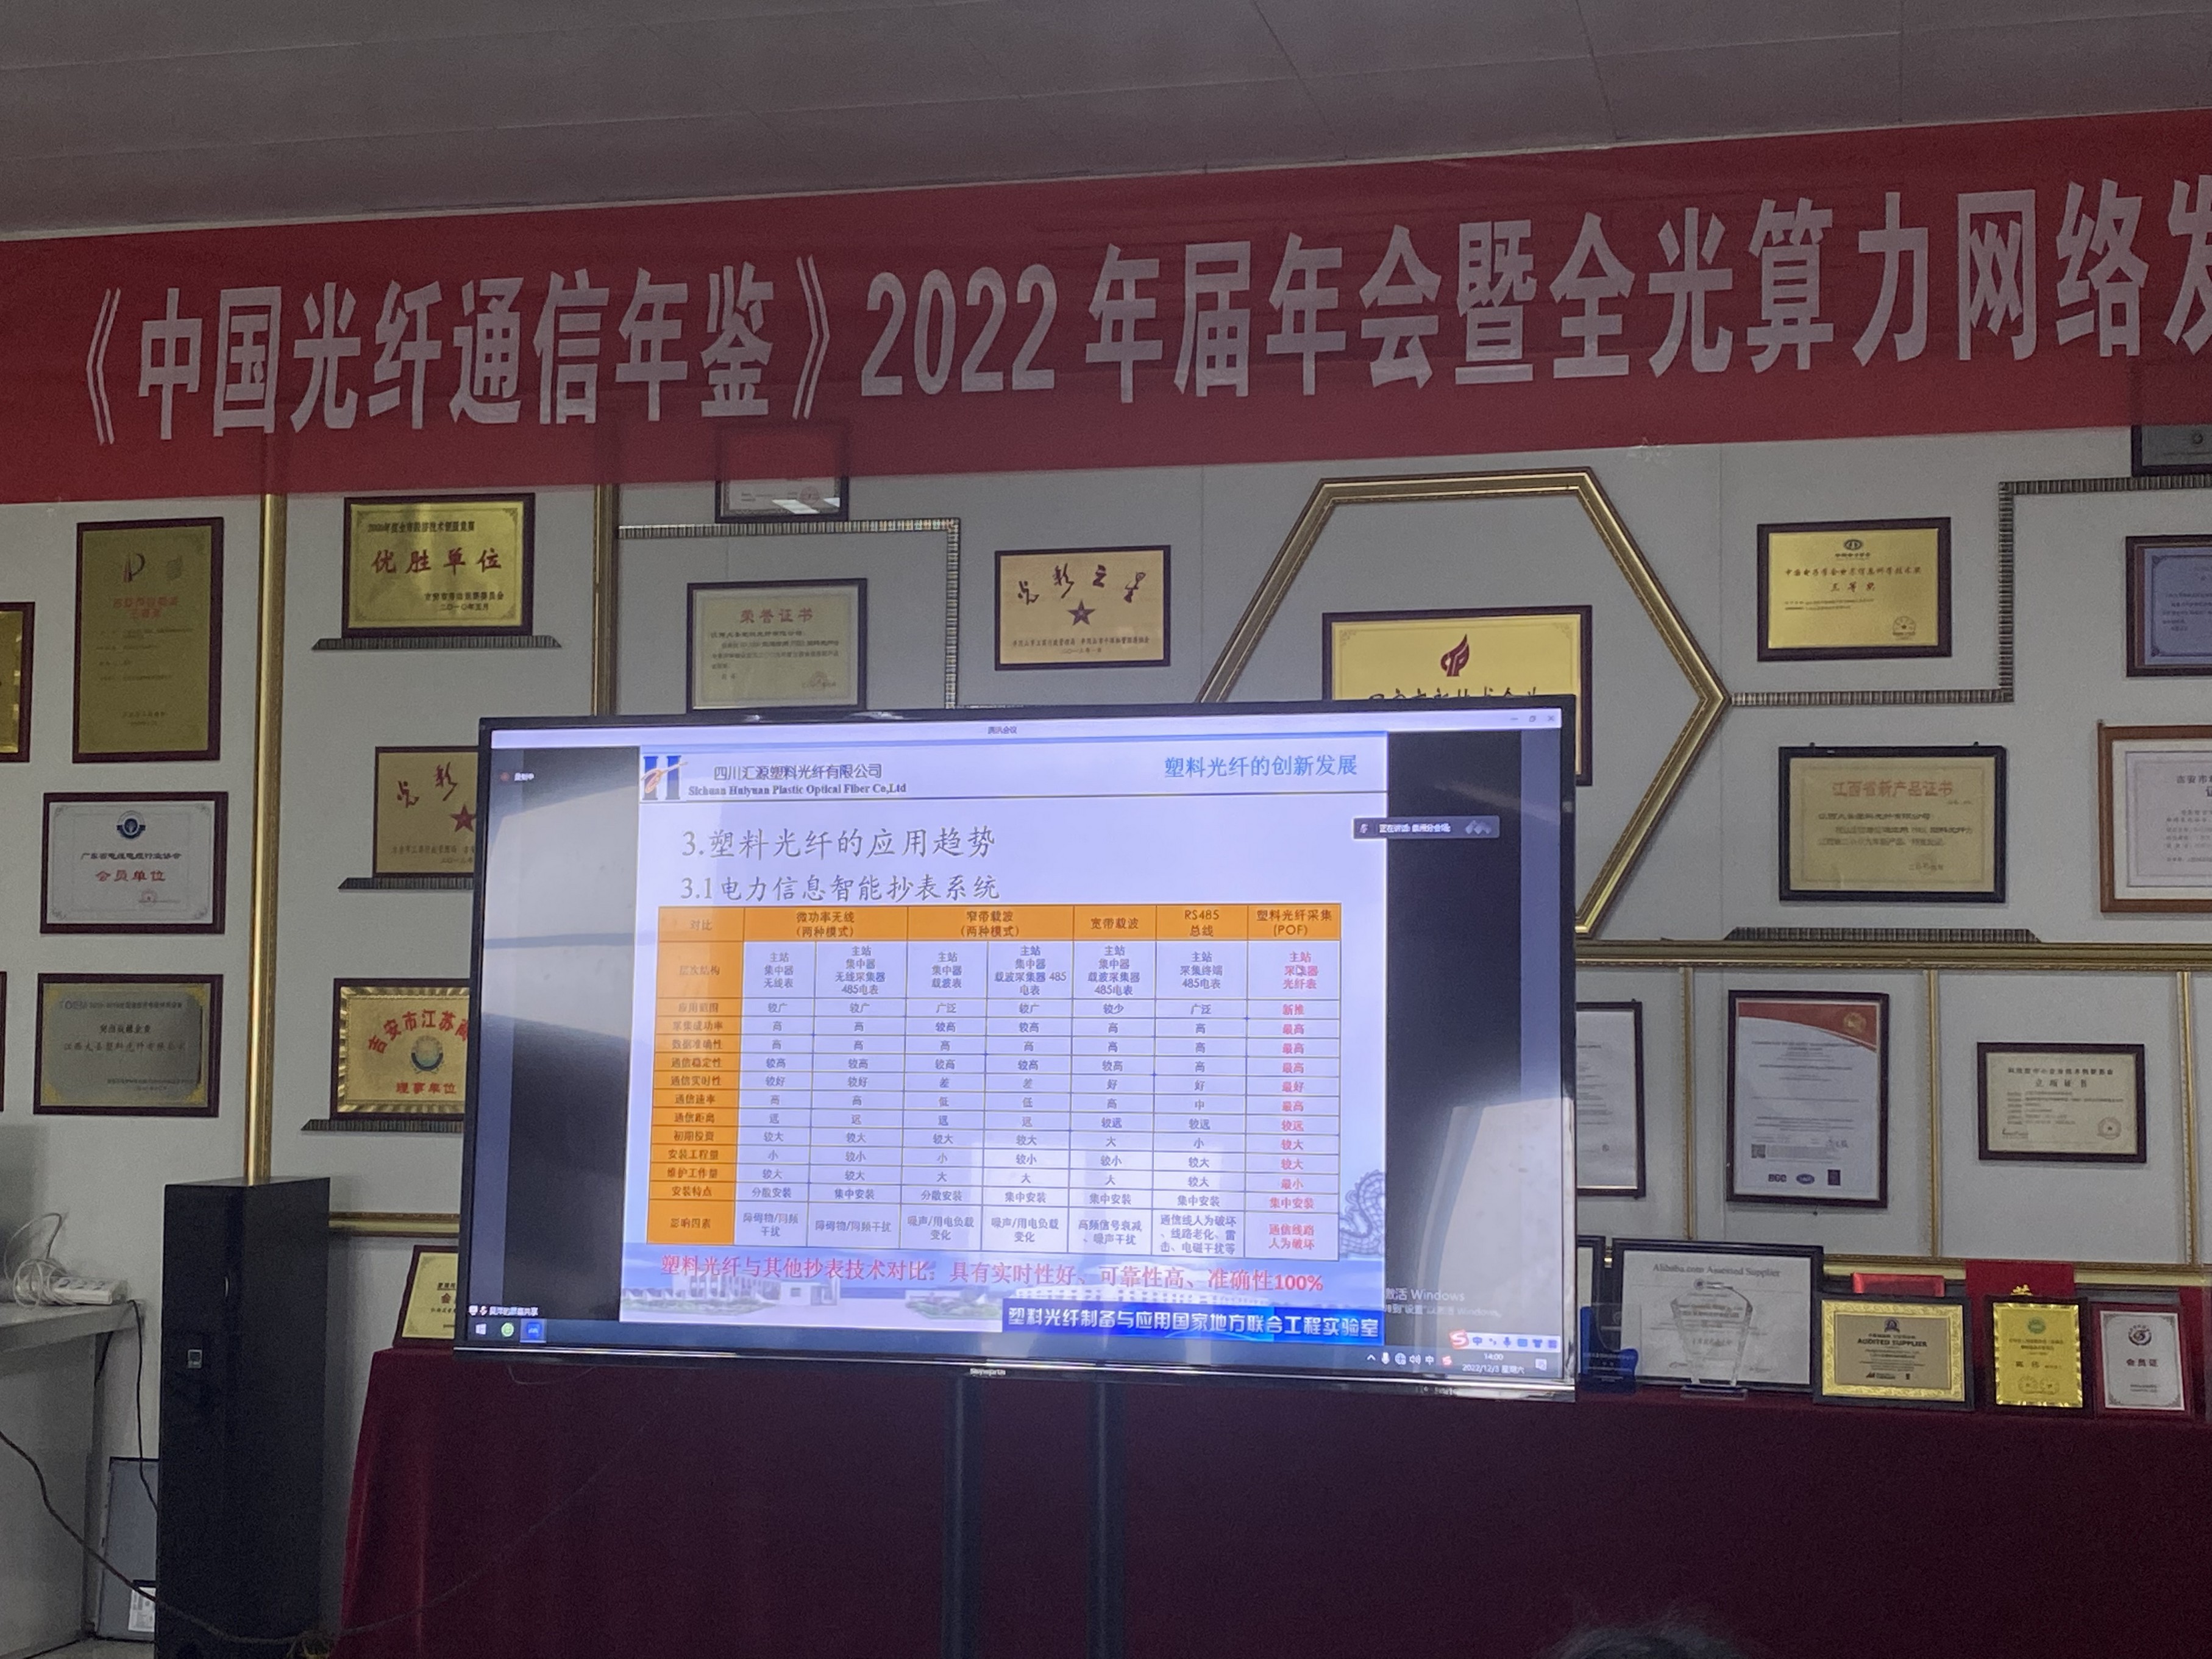 <China>The 2022 annual Conference and the All-light Computing Power Network Development Forum video network conference was successfully held